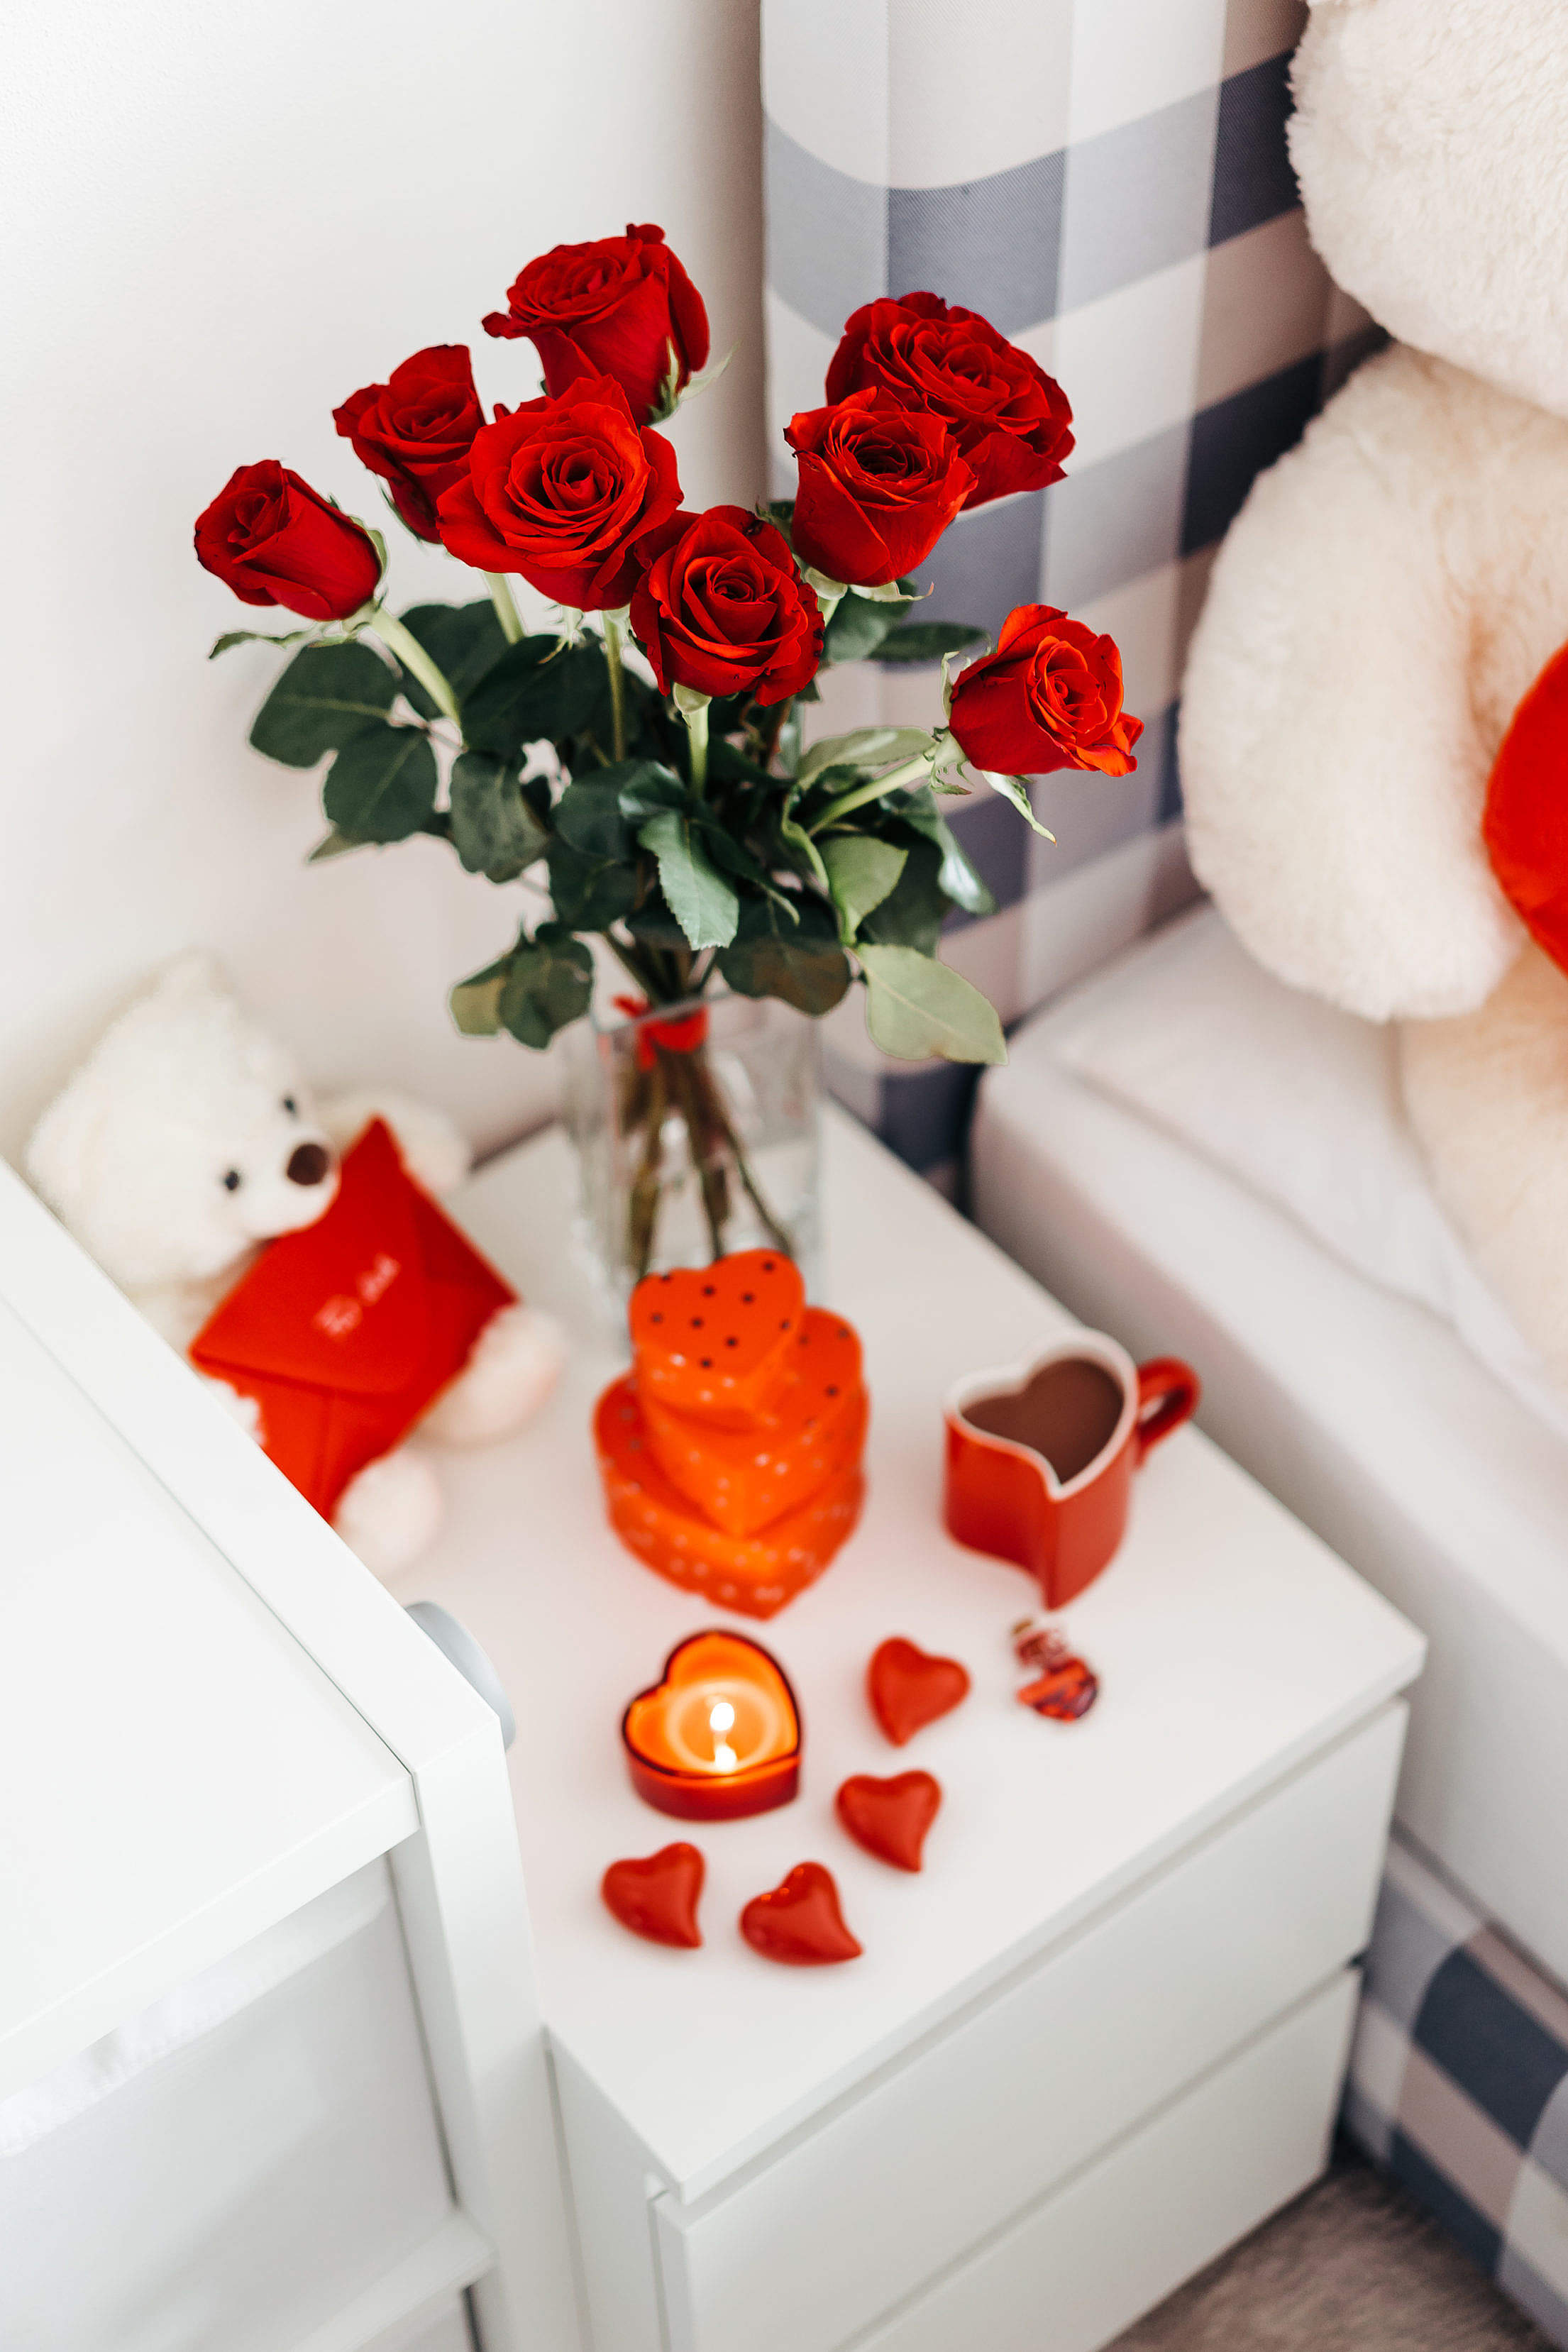 A Bouquet of Red Roses And Other Romantic Gifts on a Bedside Table Free Stock Photo